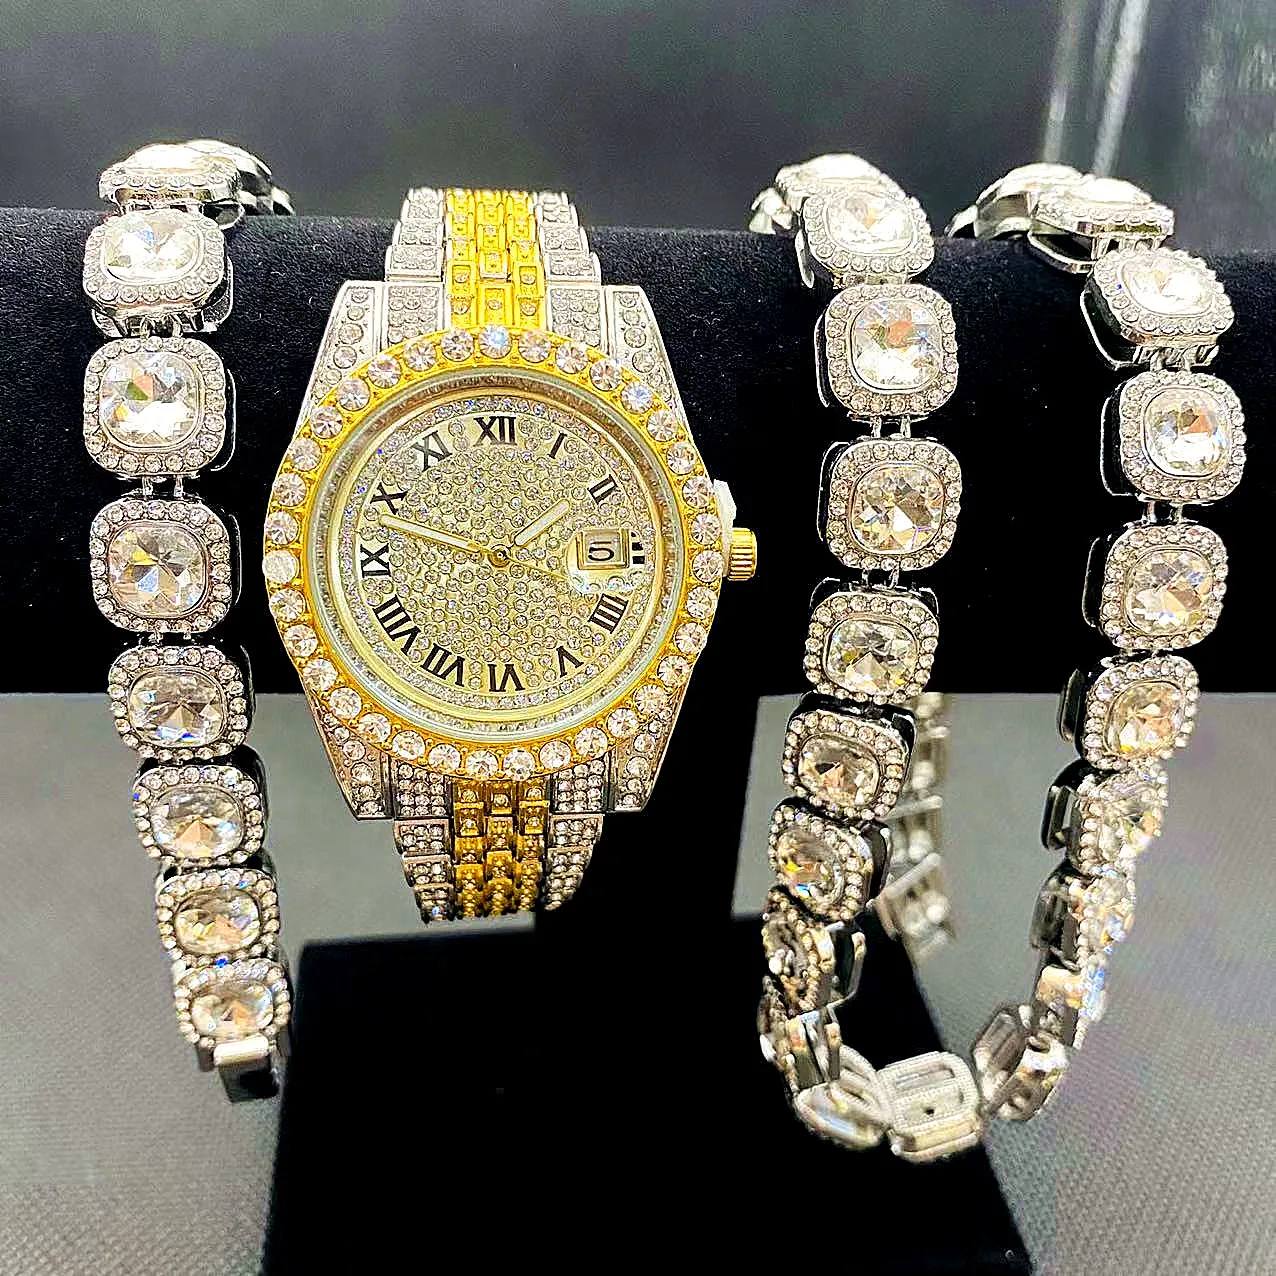 3pcs Full Iced Out Watches Mens Gold Cuban Tennis Chain Bracelet Necklace Bling Watch for Men HipHop Jewelry Men Watch Clock Set 3pcs iced out cuban tennis chains necklace watches quartz women men s silver color bracelet set hip hop clock jewelry gifts